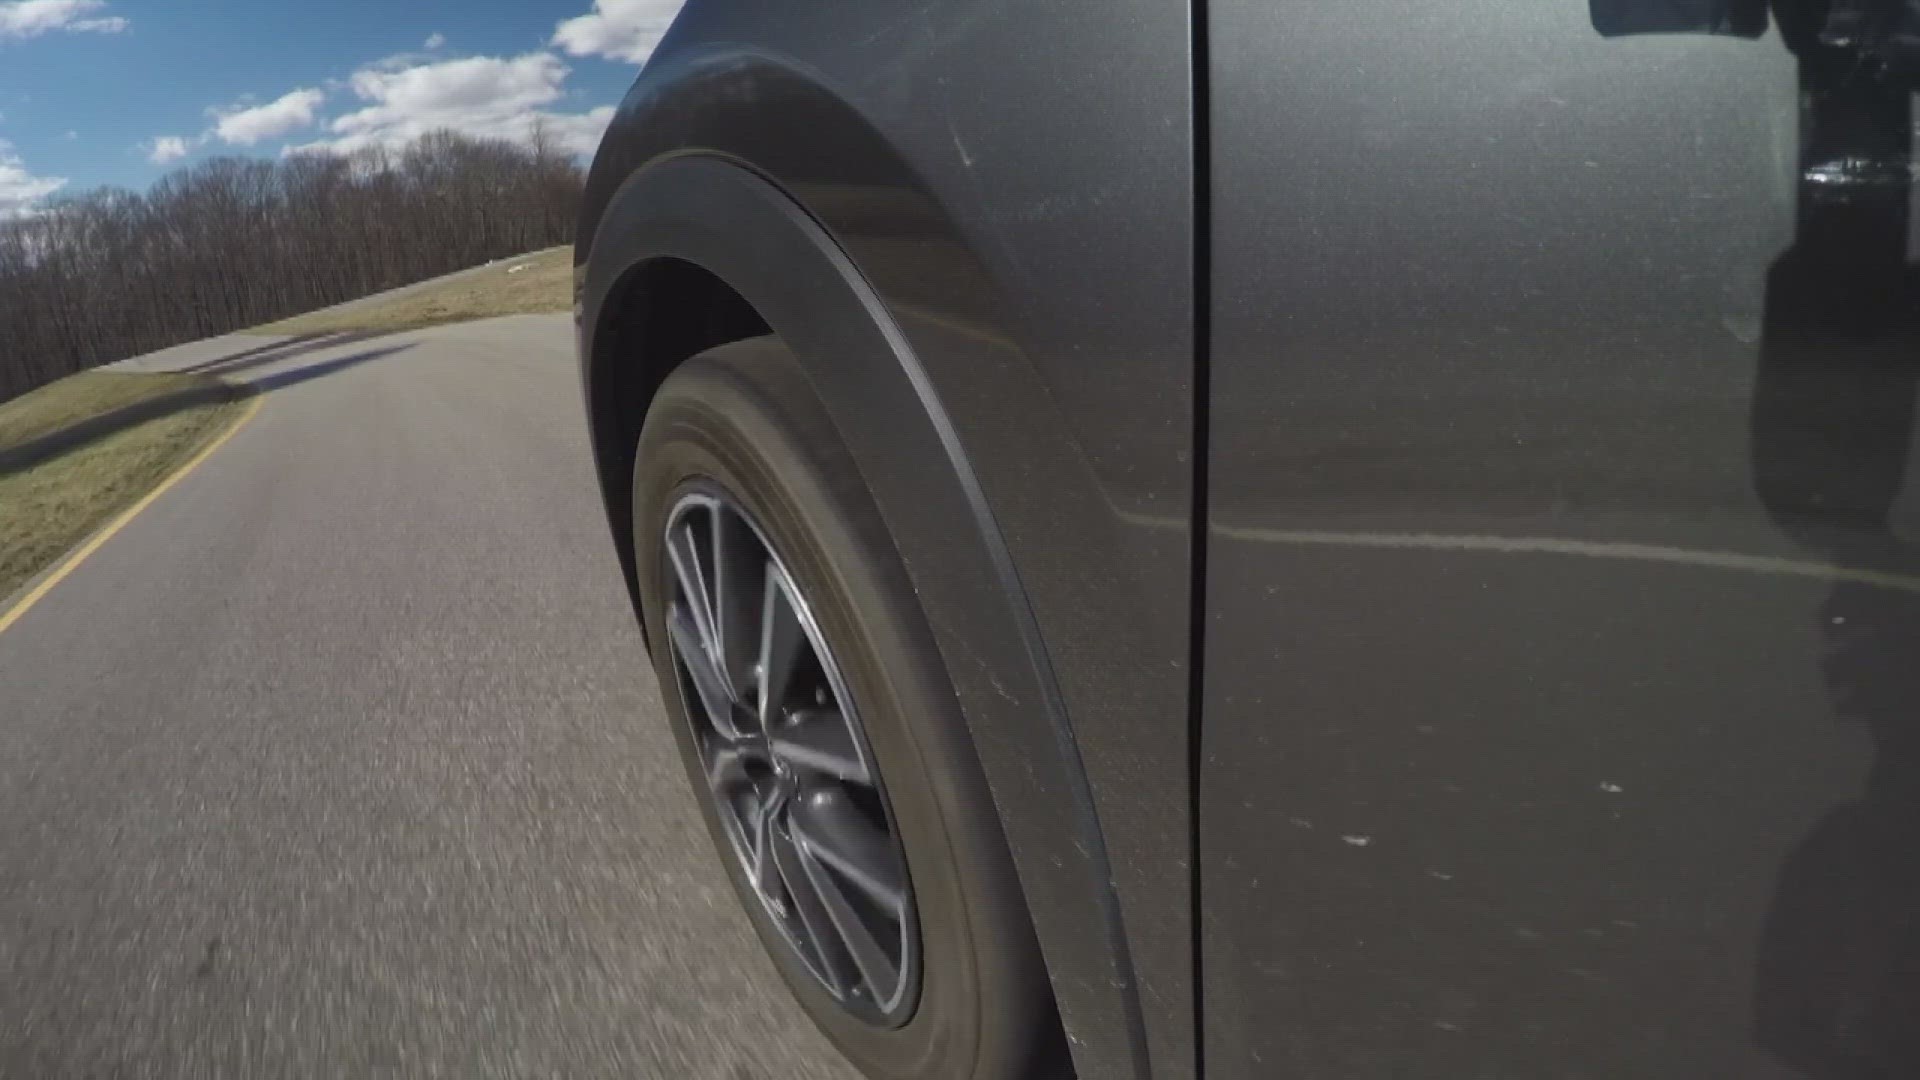 Consumer Reports breaks down how the vehicles work and whether you need one.